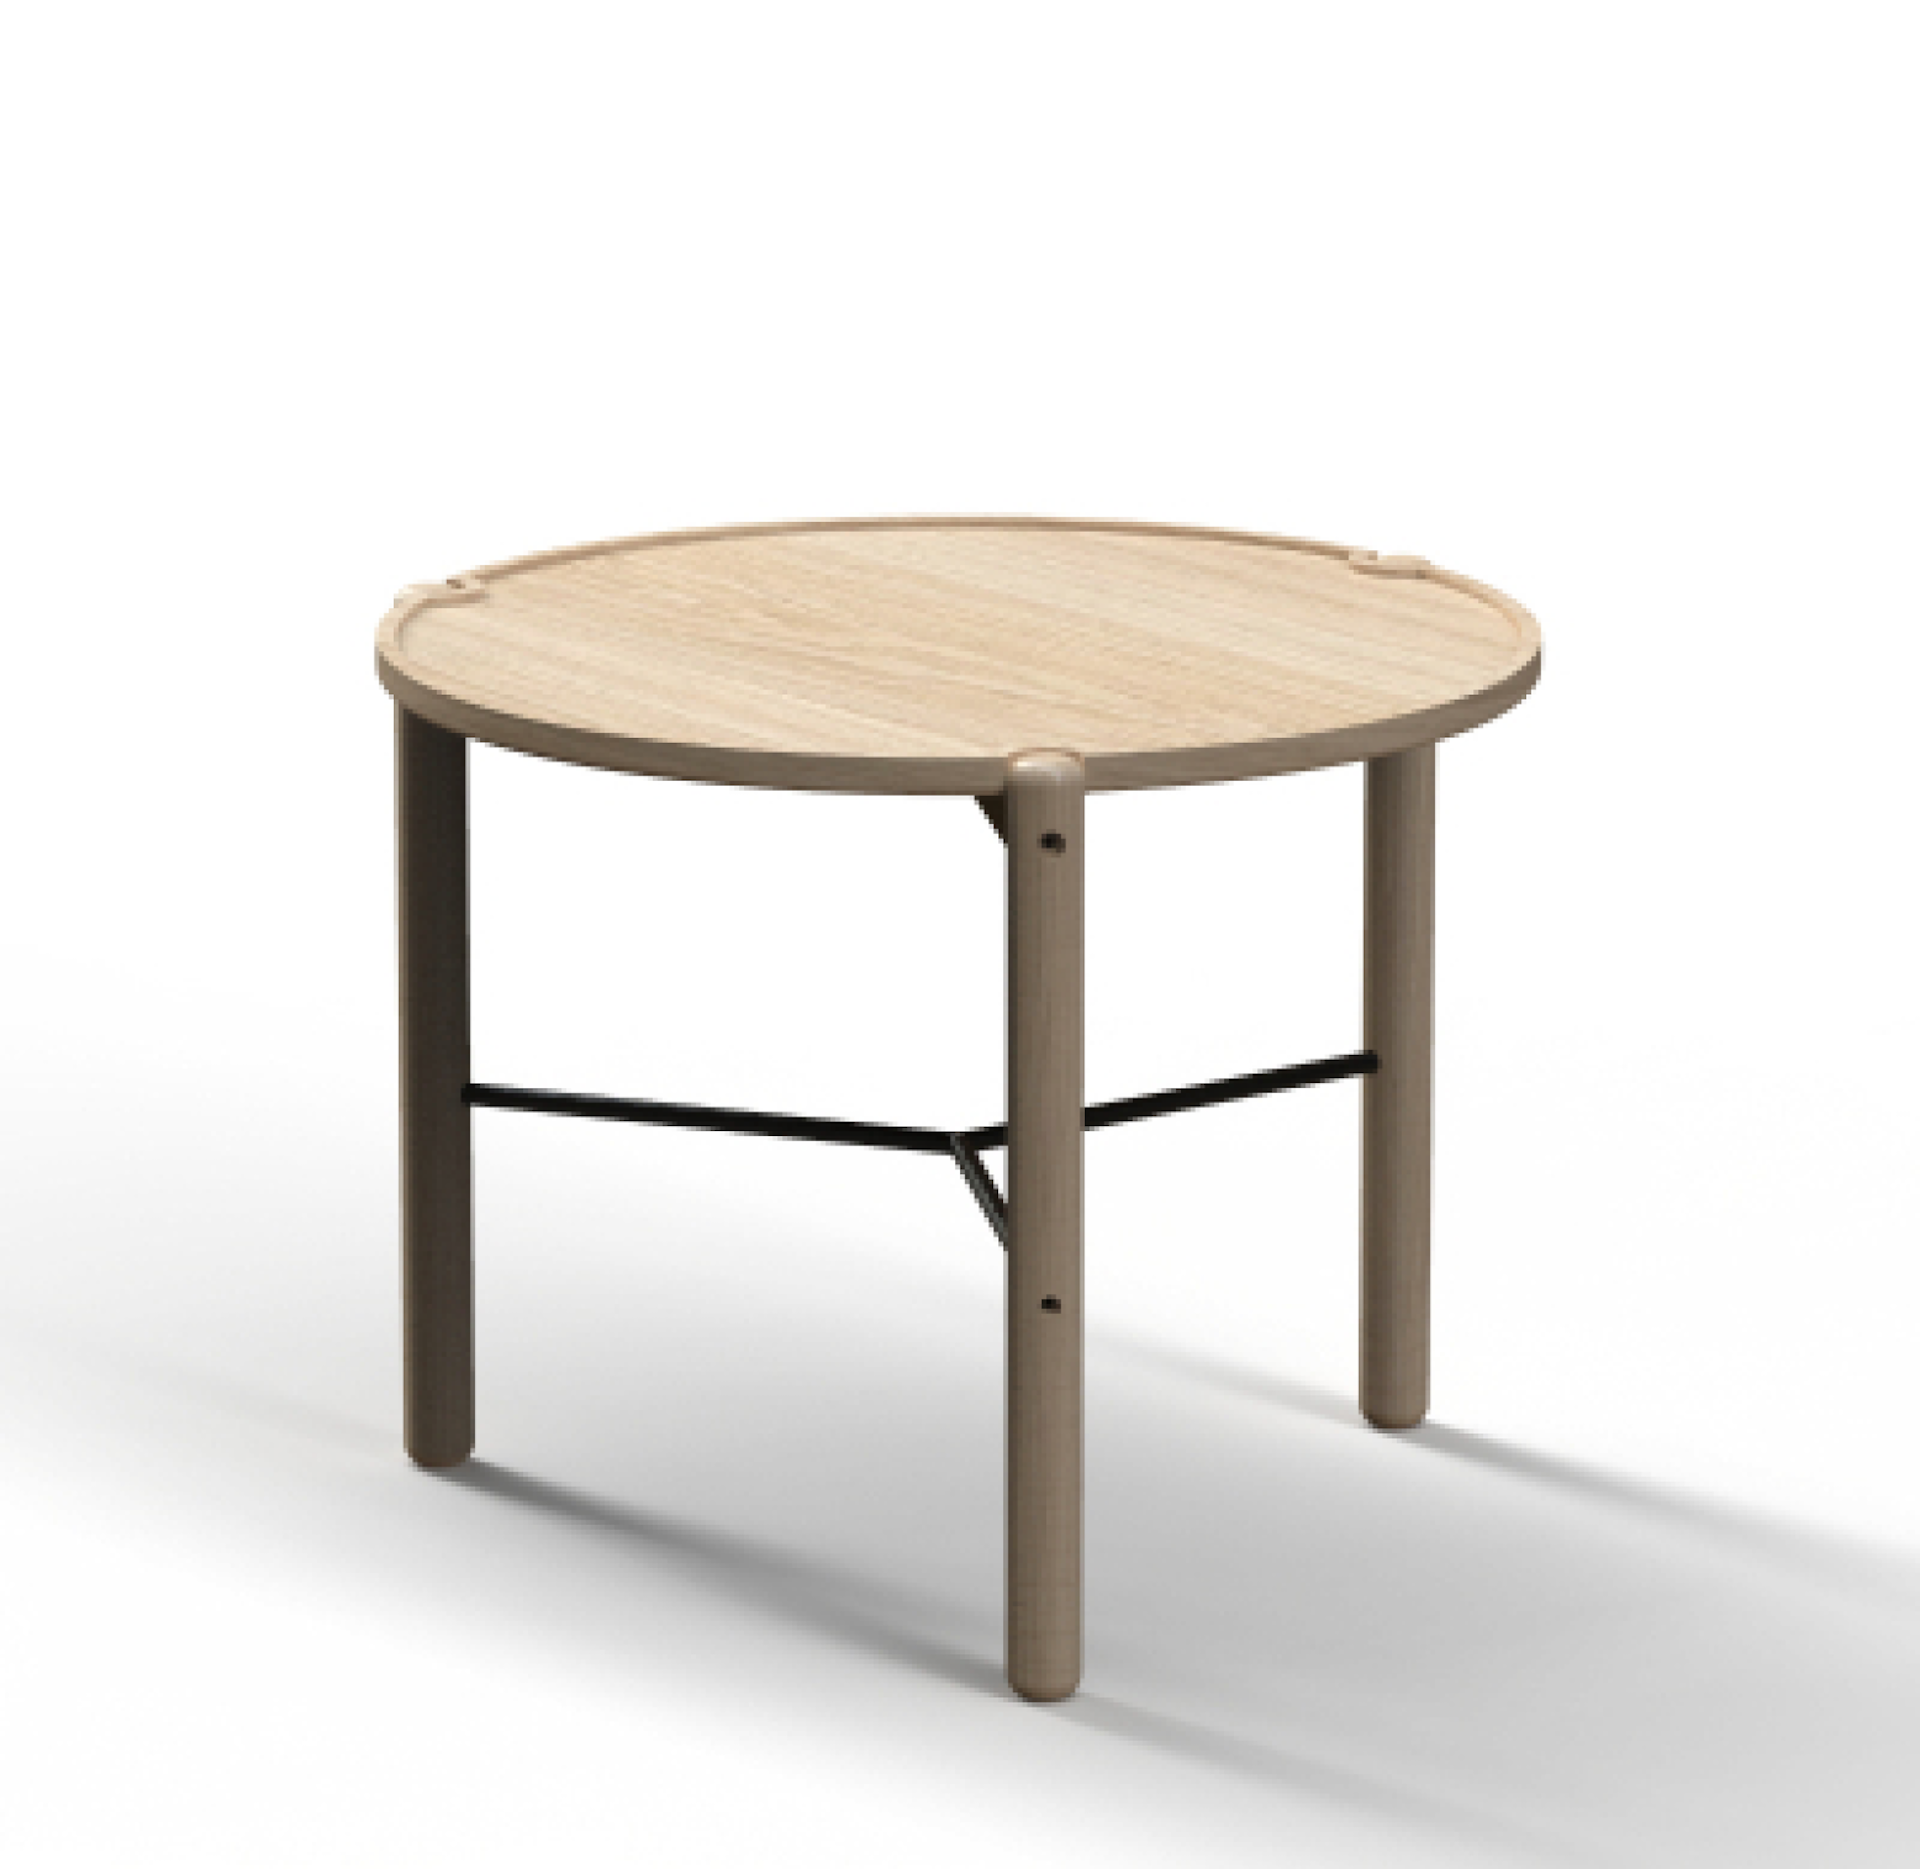 Nora Coffee table - Round